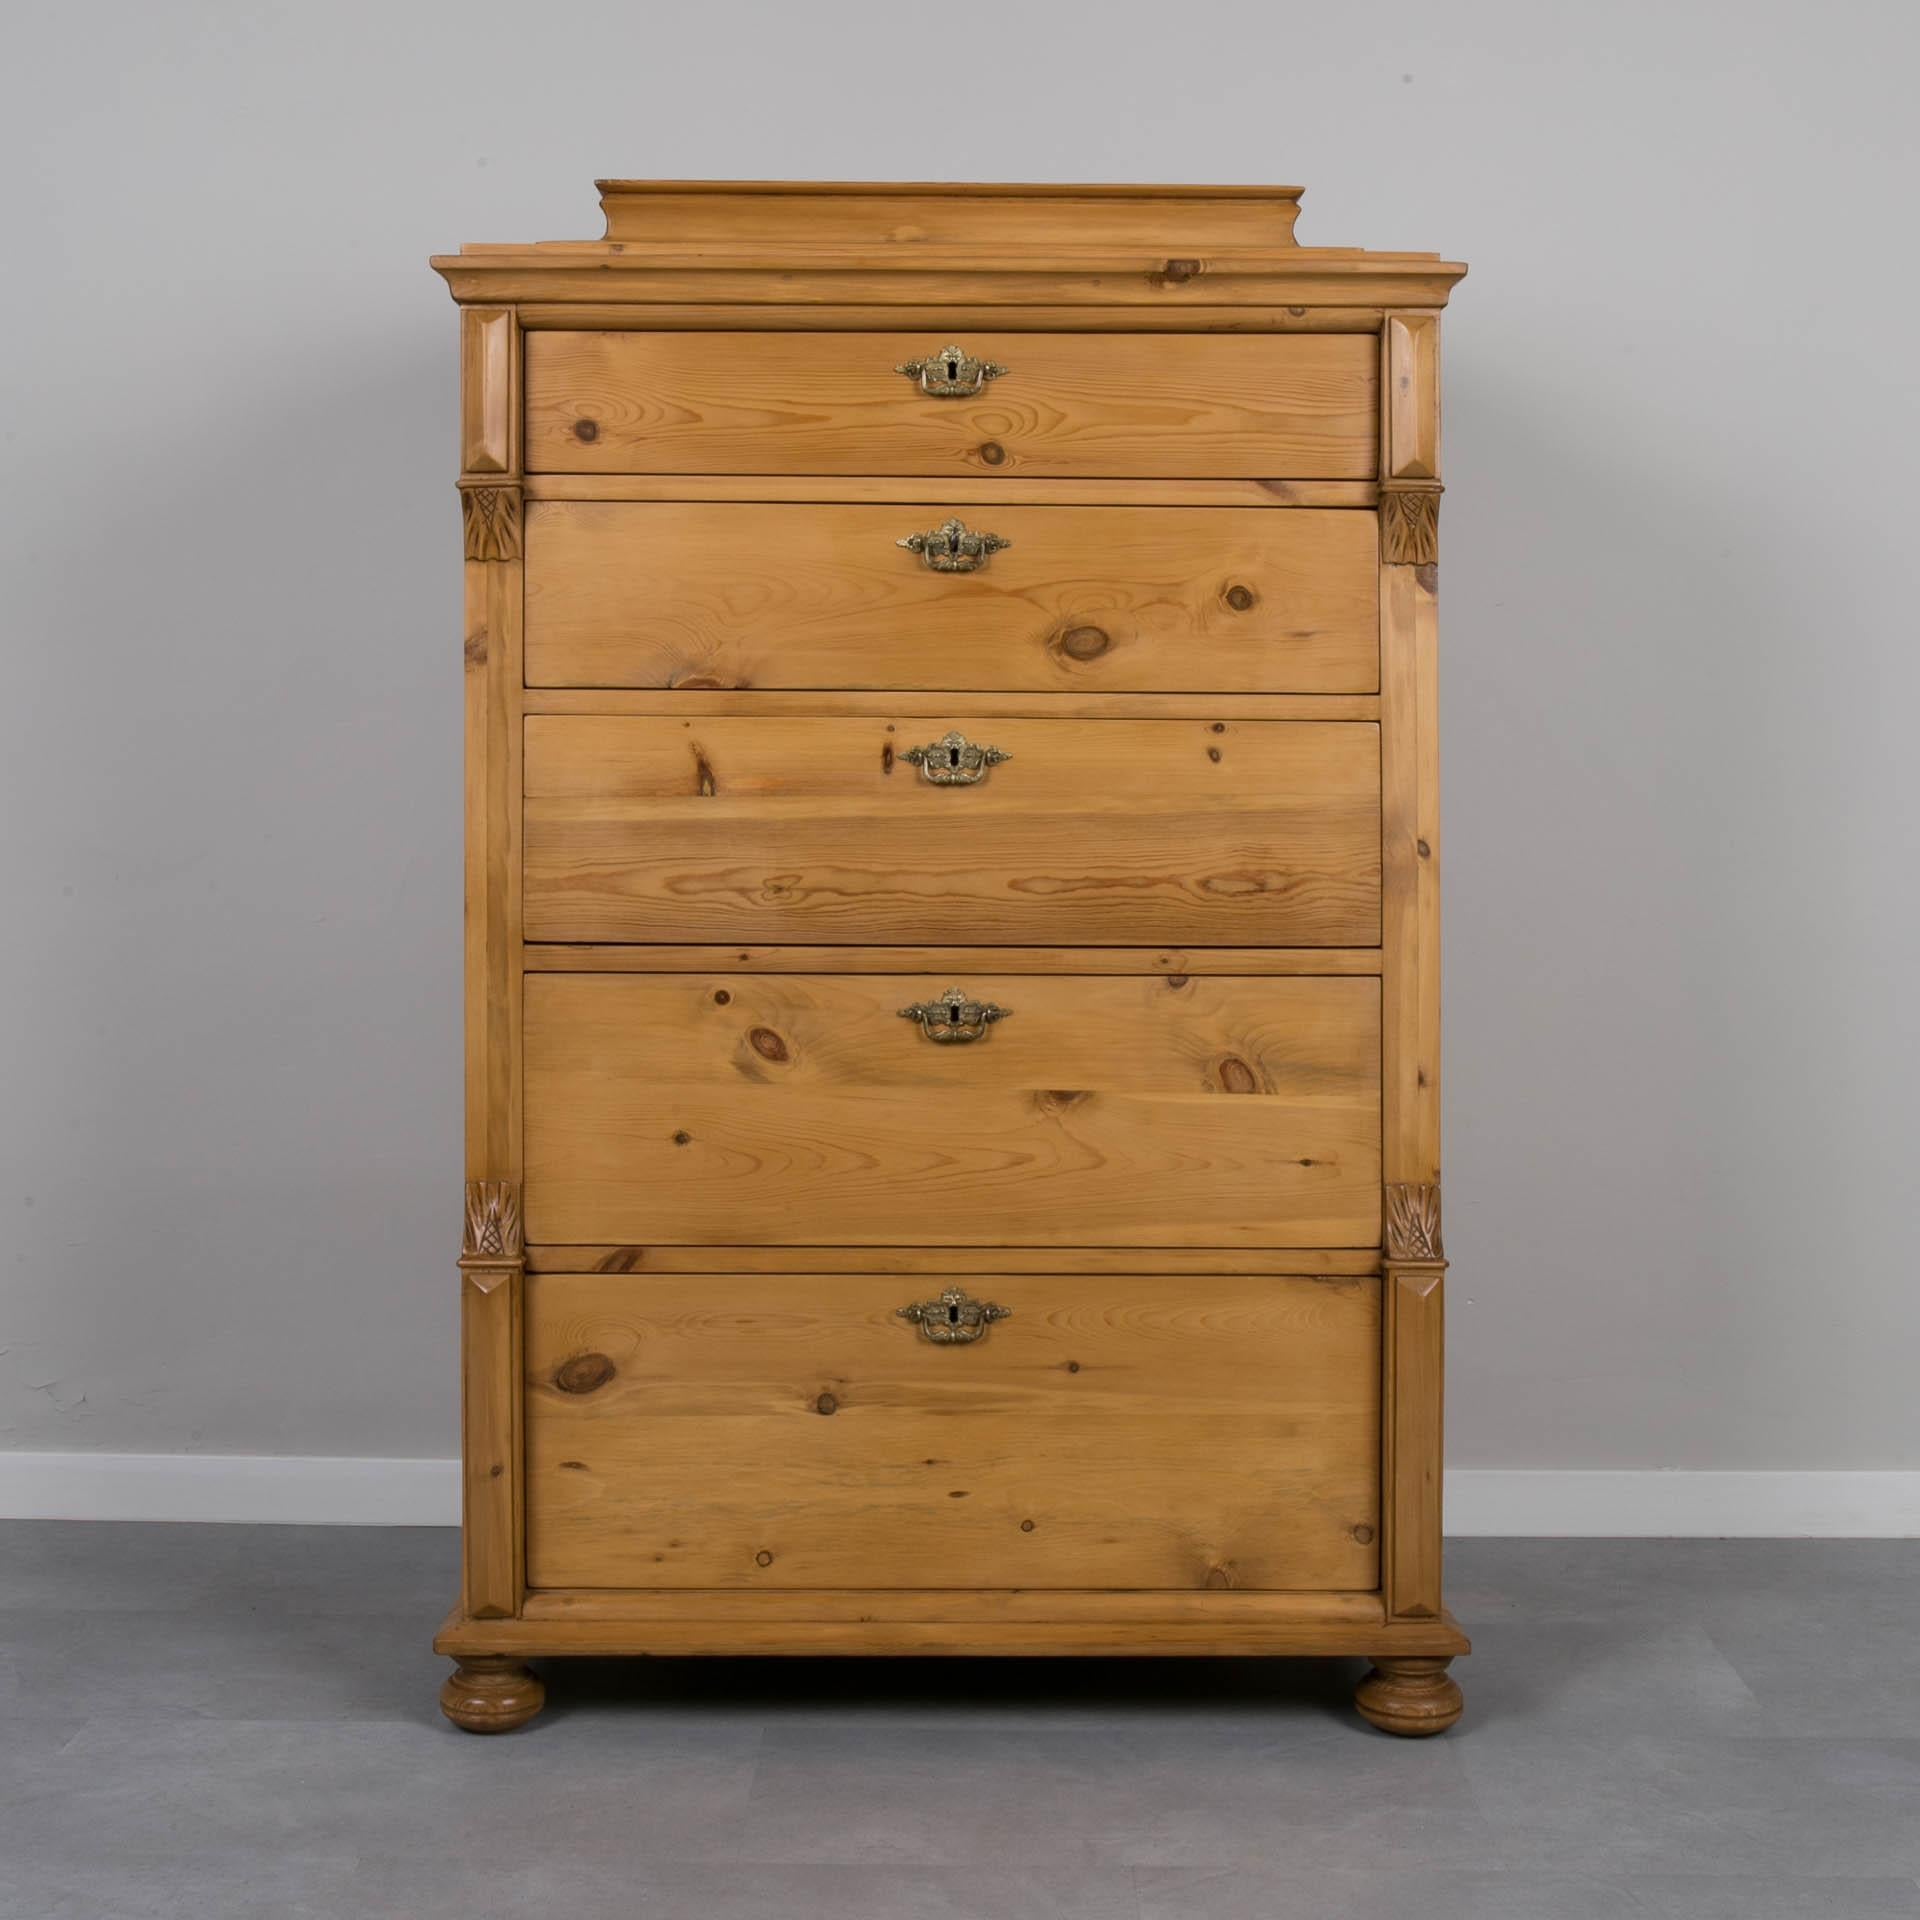 This chest of drawers comes from Norway and was made at the beginning of the 20th century (around 1900 - 1910). The piece was in very good original condition and only needed a subtle renovation and refreshing. The wooden surfaces made of spruce have